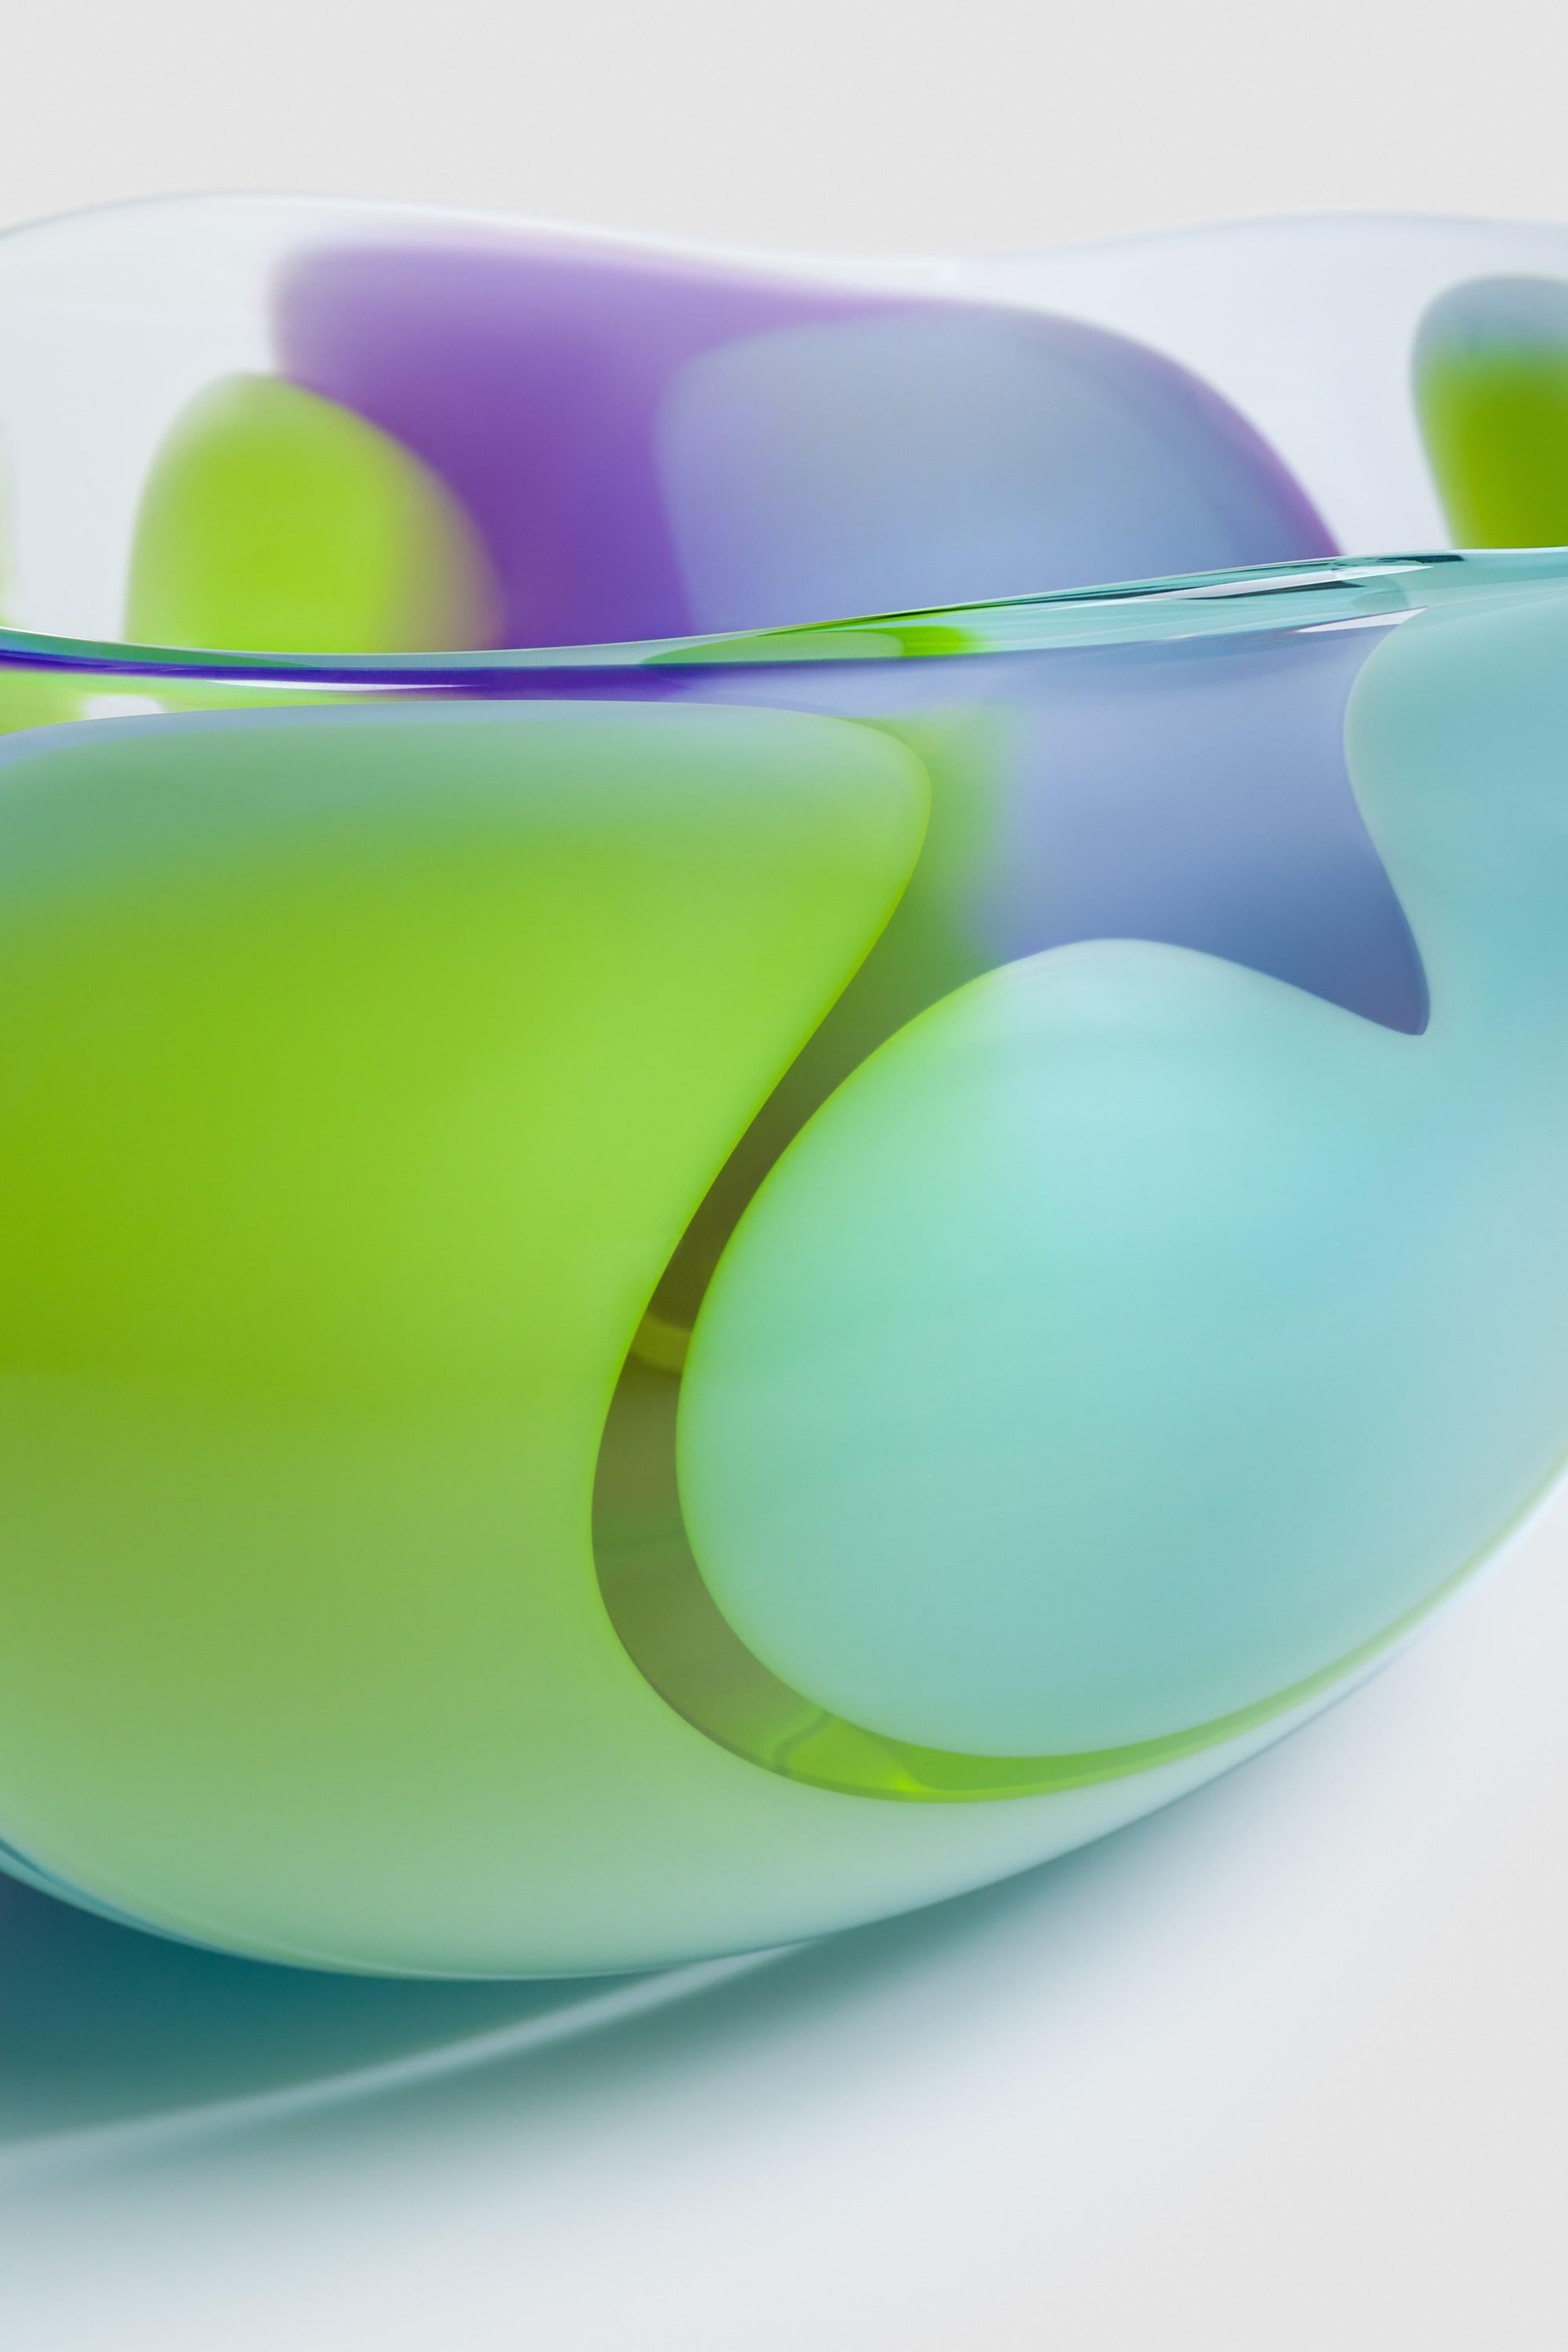 Contemporary Waves No 652, lime, aqua & purple abstract fluid glass bowl by Neil Wilkin